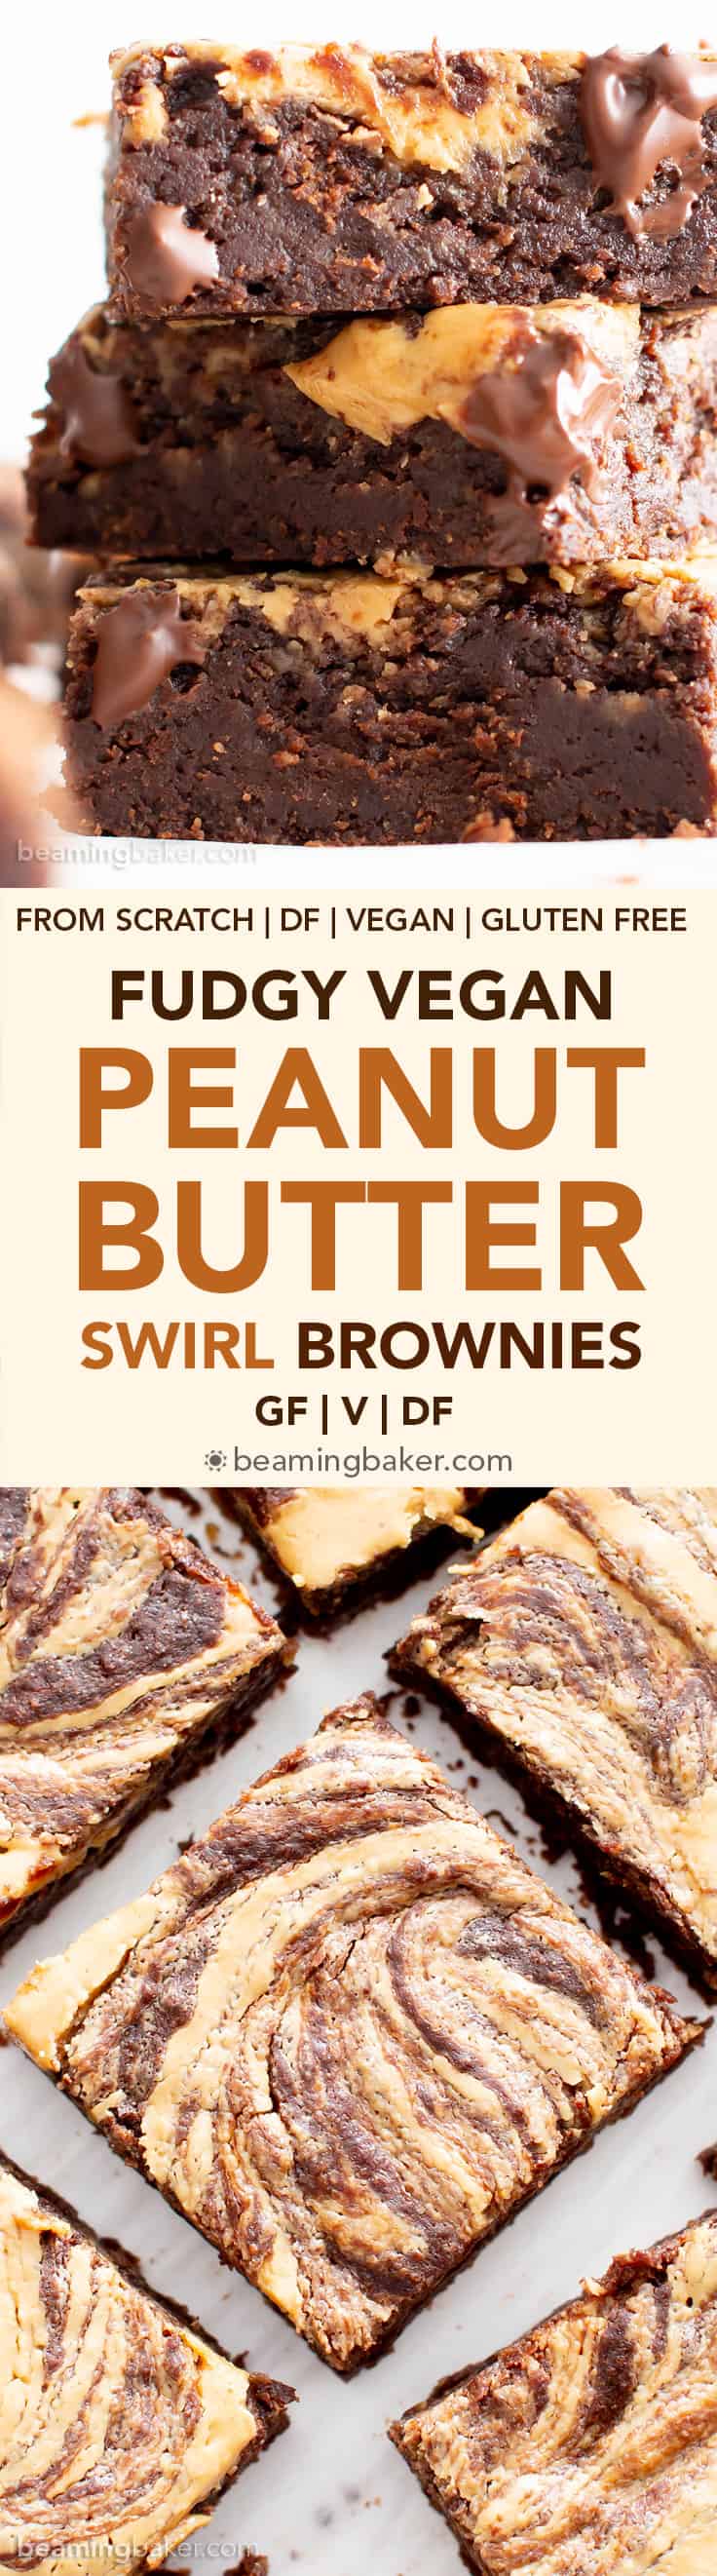 Fudgy Vegan Peanut Butter Swirl Brownies (Gluten Free): this vegan gluten free brownies recipe is made from scratch & easy! It’s the fudgiest chocolate peanut butter swirl brownies ever—with thick ribbons of peanut butter and rich, moist brownie flavor! #Vegan #Brownies #GlutenFree #DairyFree #PeanutButter | Recipe at BeamingBaker.com